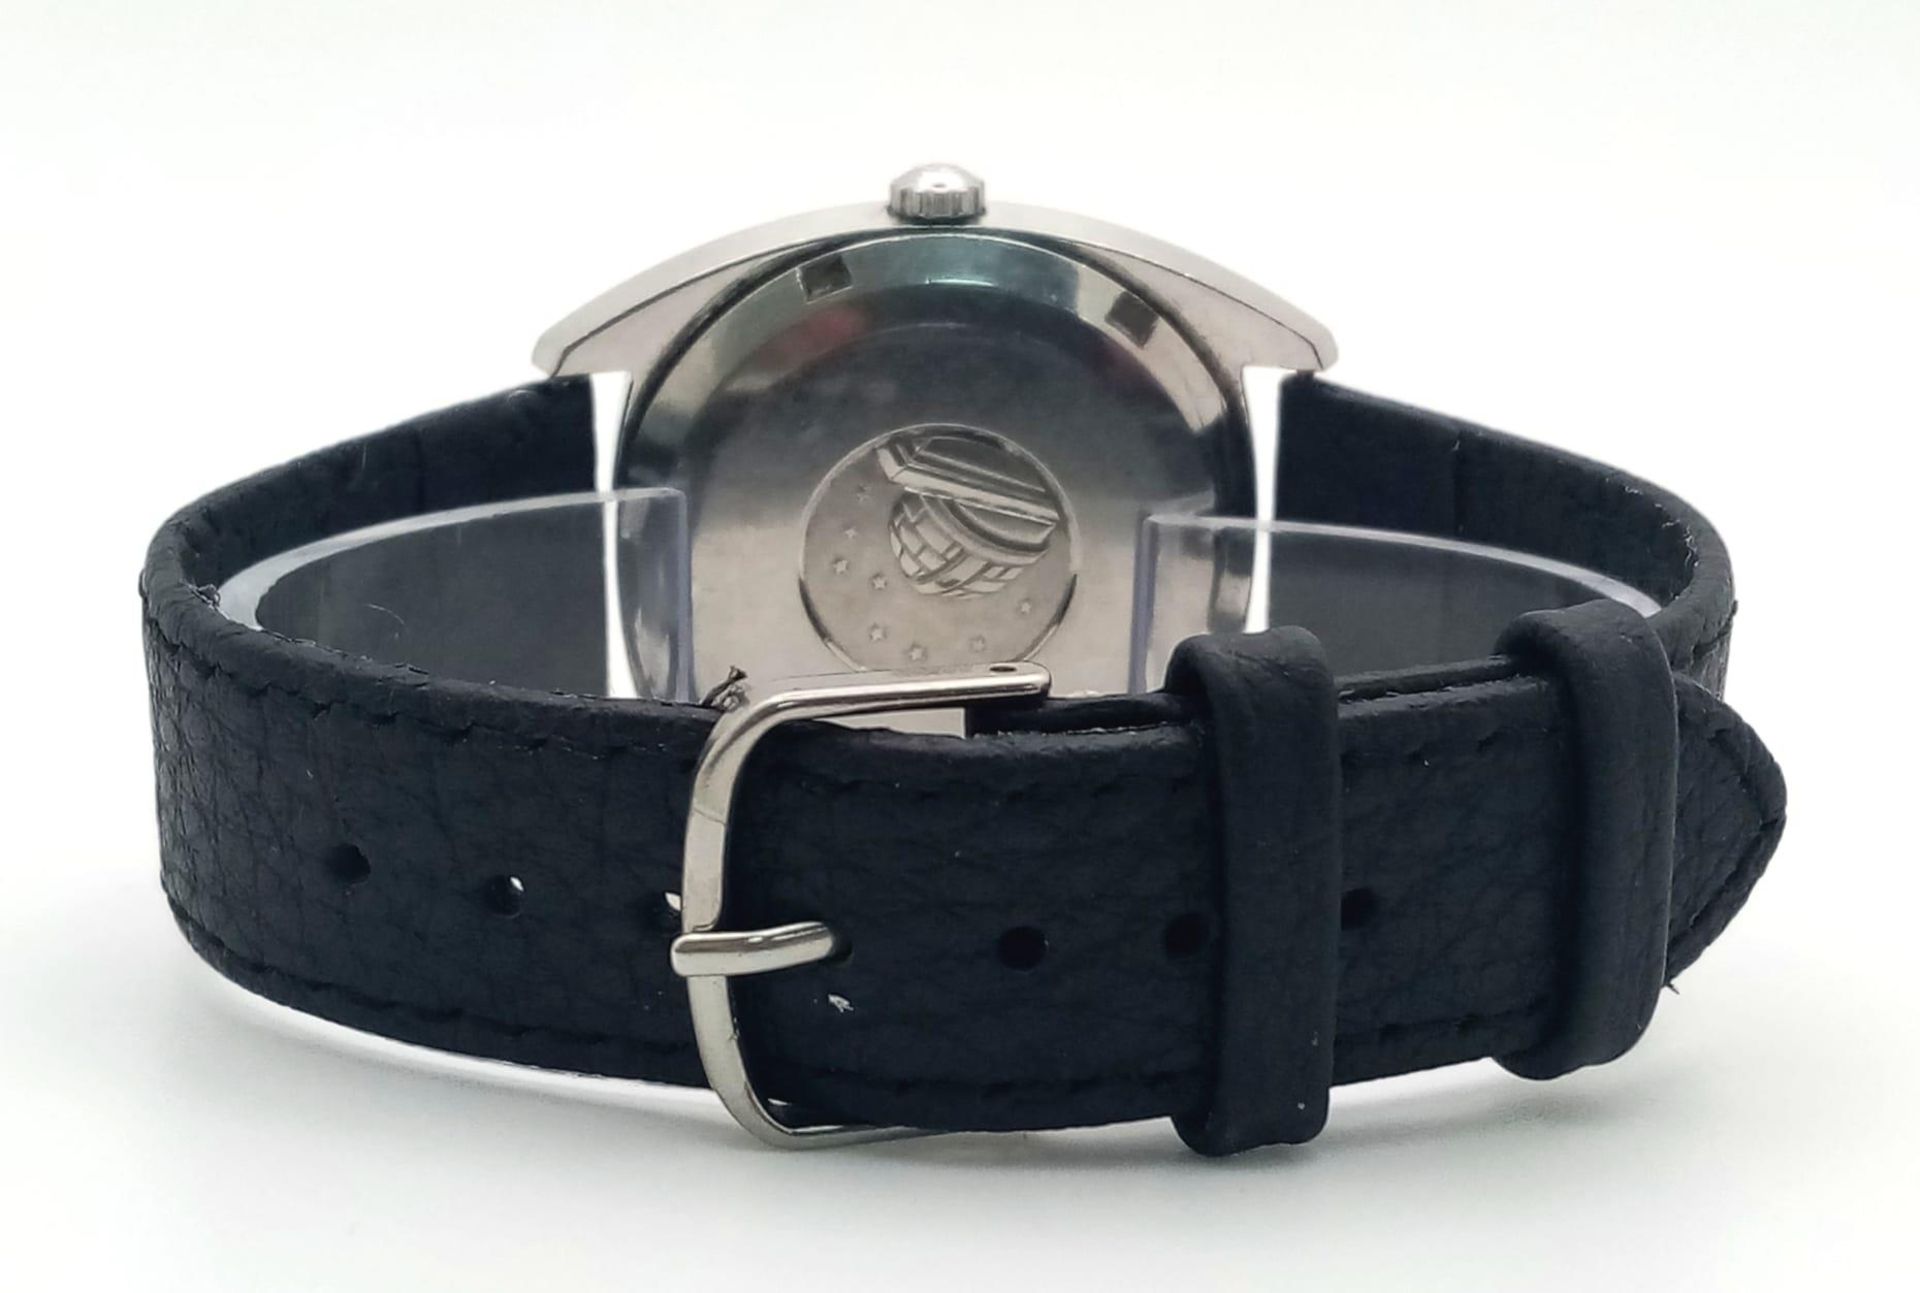 A Vintage Automatic Omega Constellation. Black leather strap. Stainless steel case - 36mm. Grey dial - Image 6 of 7